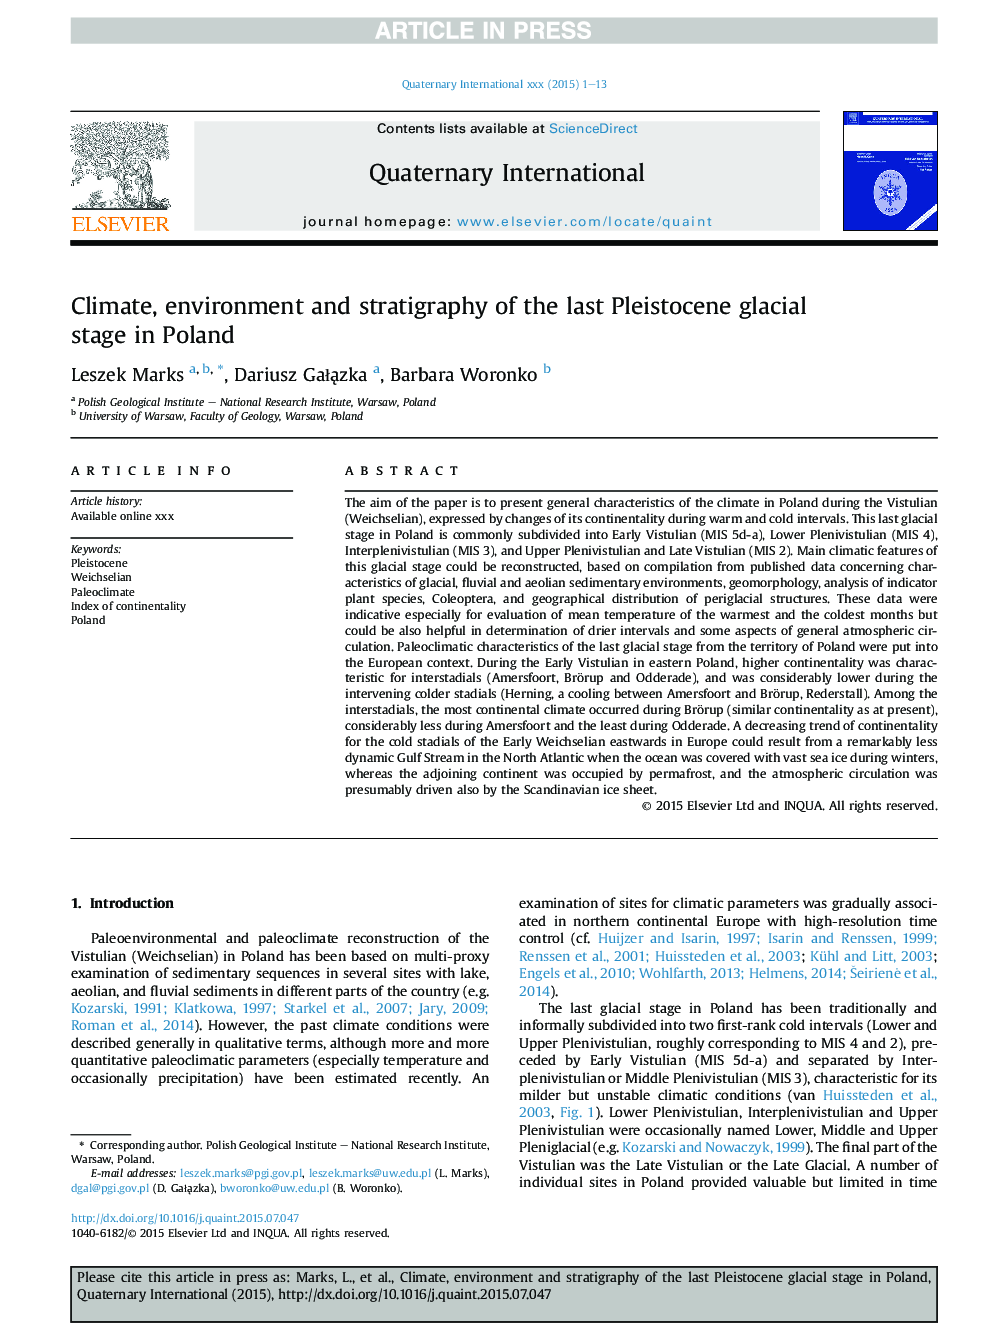 Climate, environment and stratigraphy of the last Pleistocene glacial stage in Poland